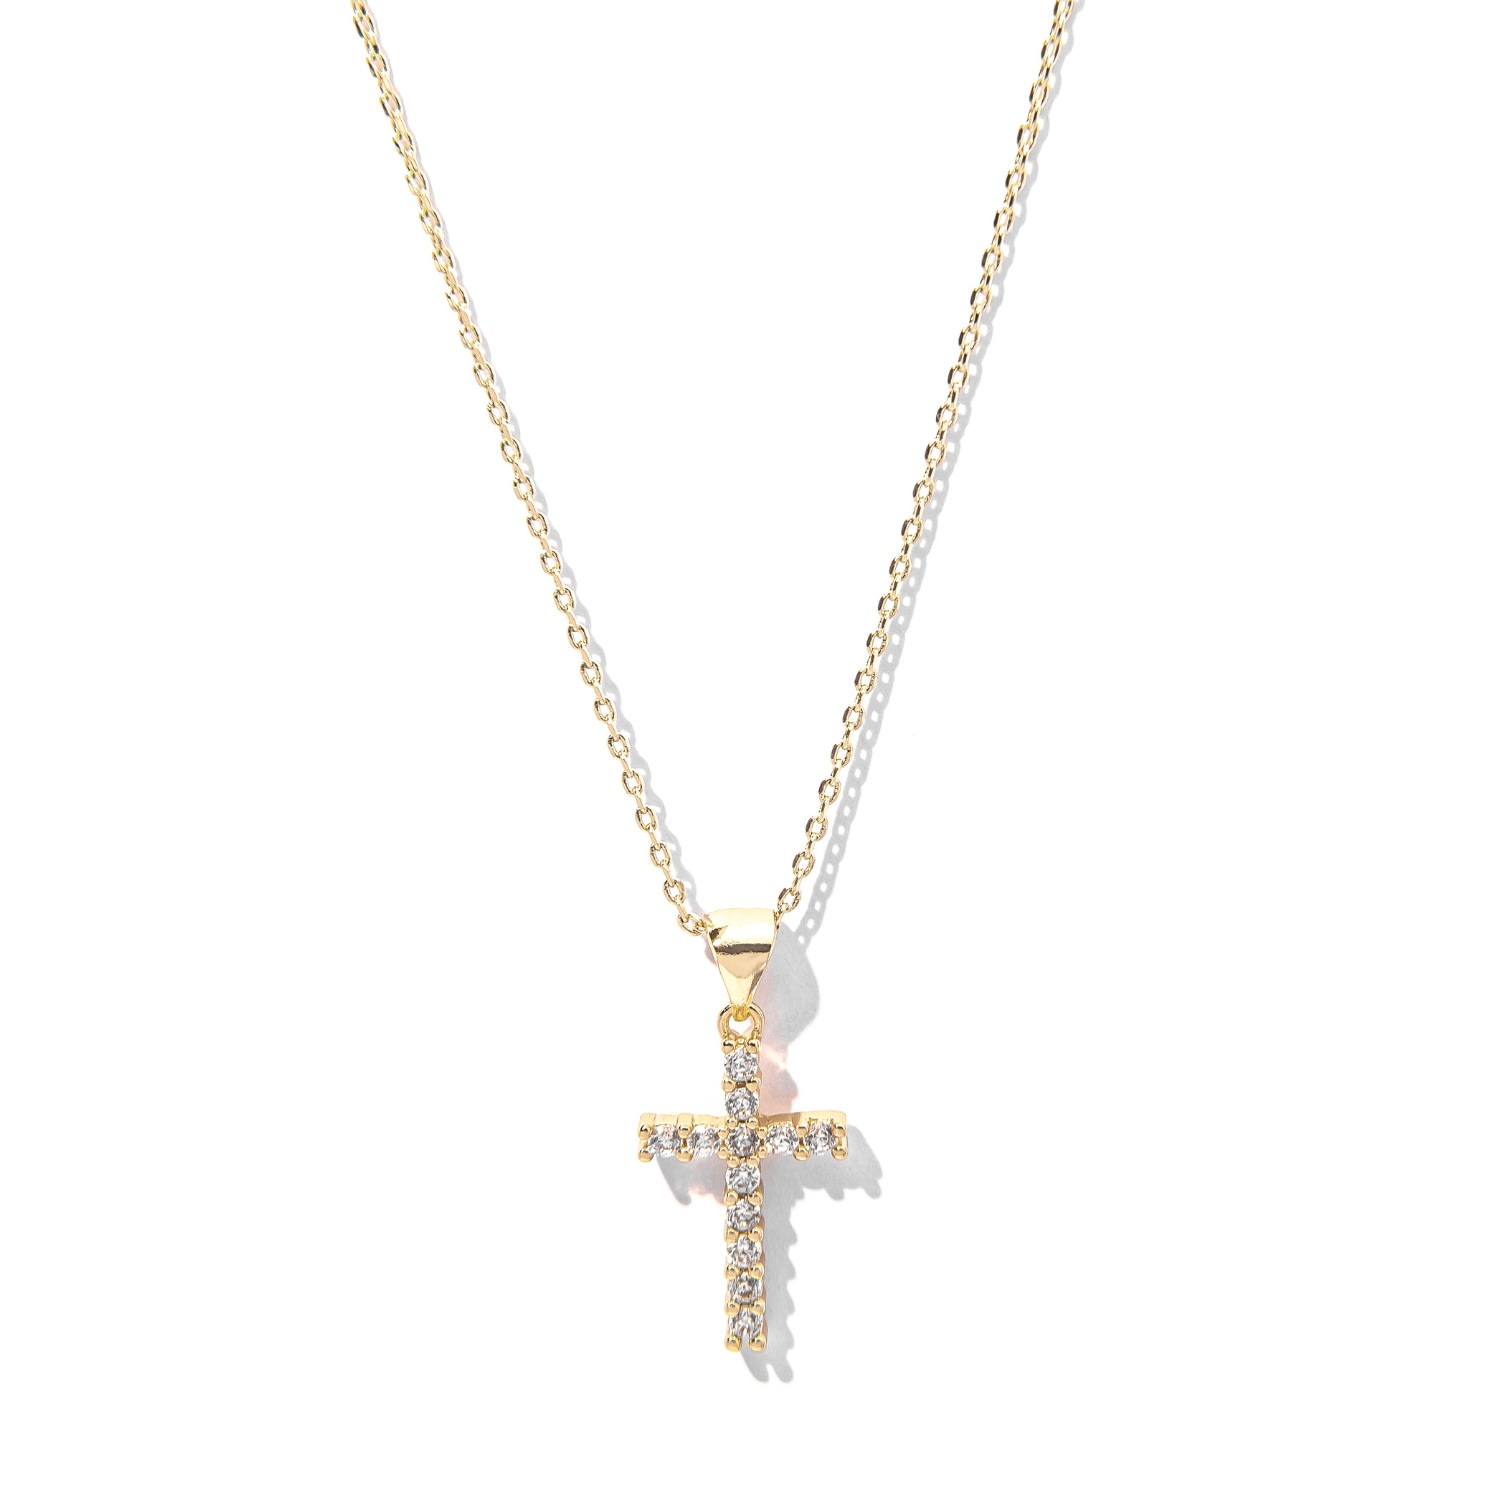 Women’s Gold Filled Mini Cross Cable Chain Necklace The Essential Jewels